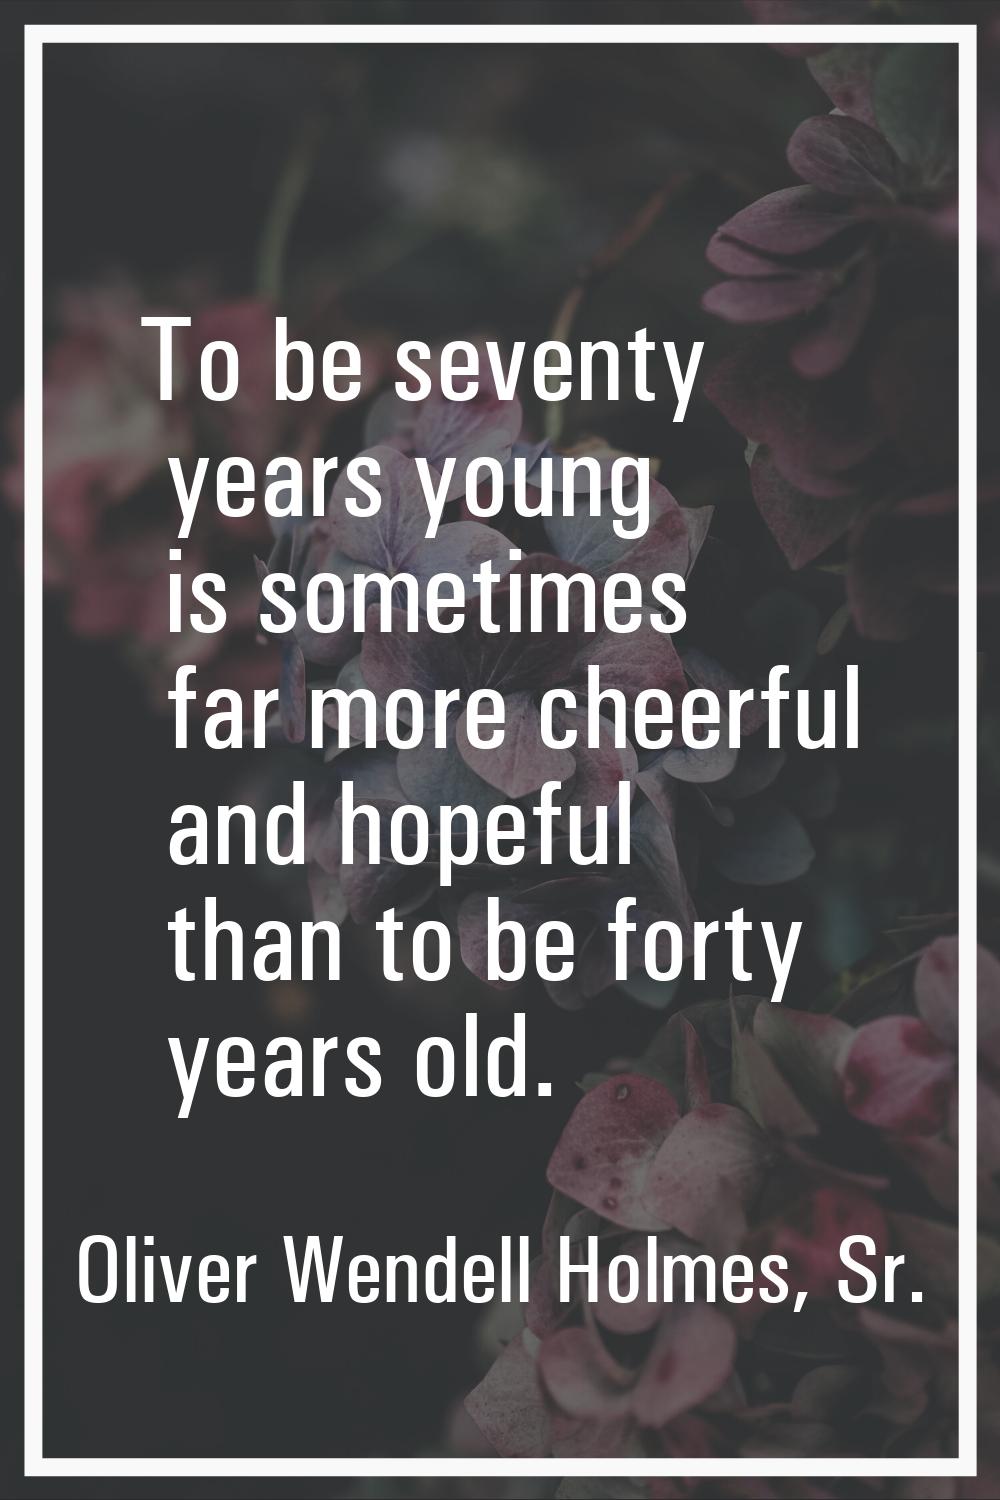 To be seventy years young is sometimes far more cheerful and hopeful than to be forty years old.